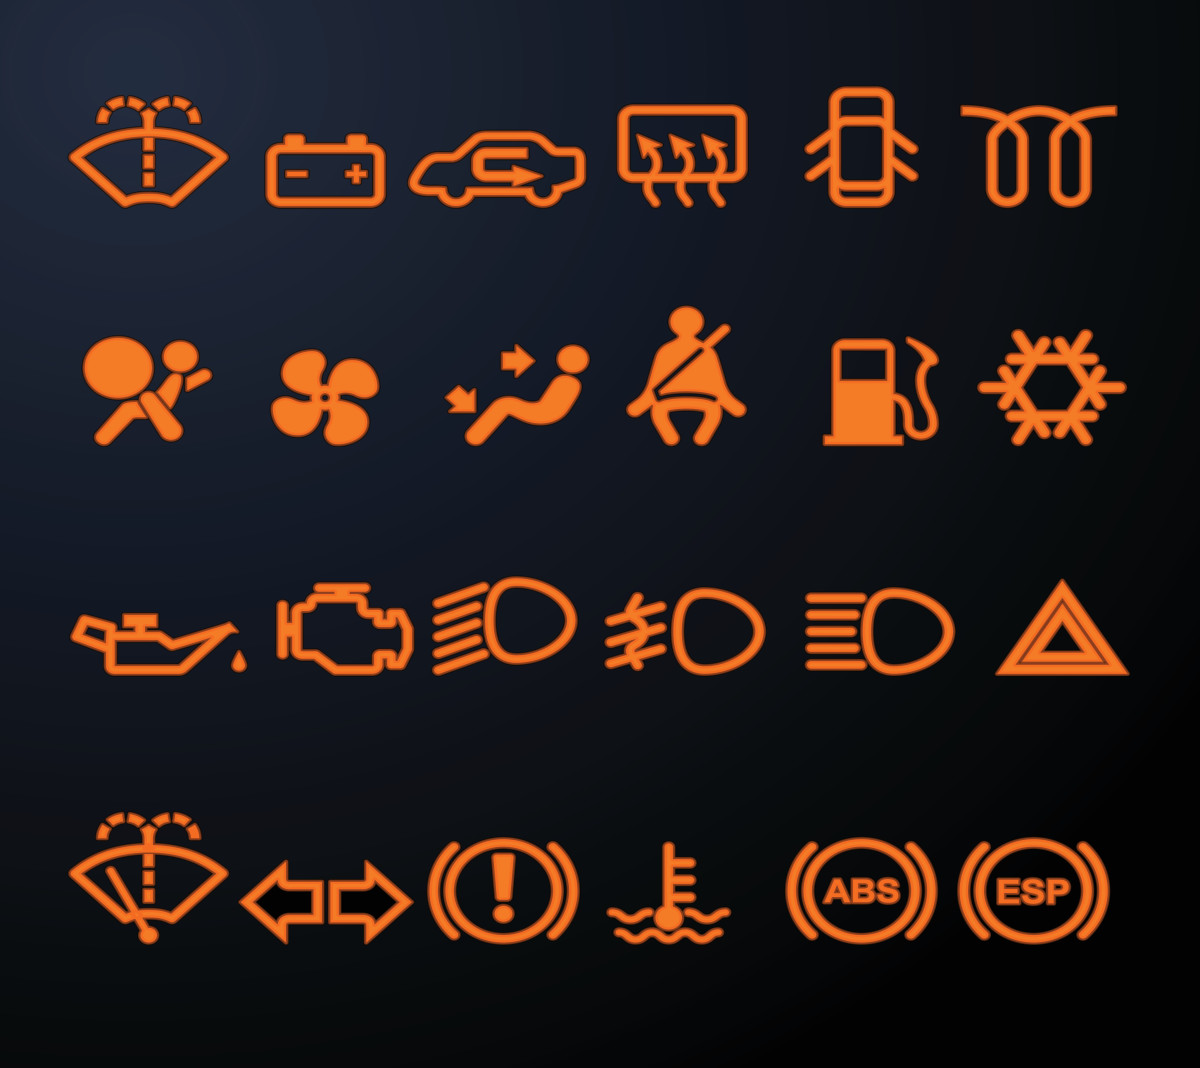 Car Dashboard Lights & Meanings